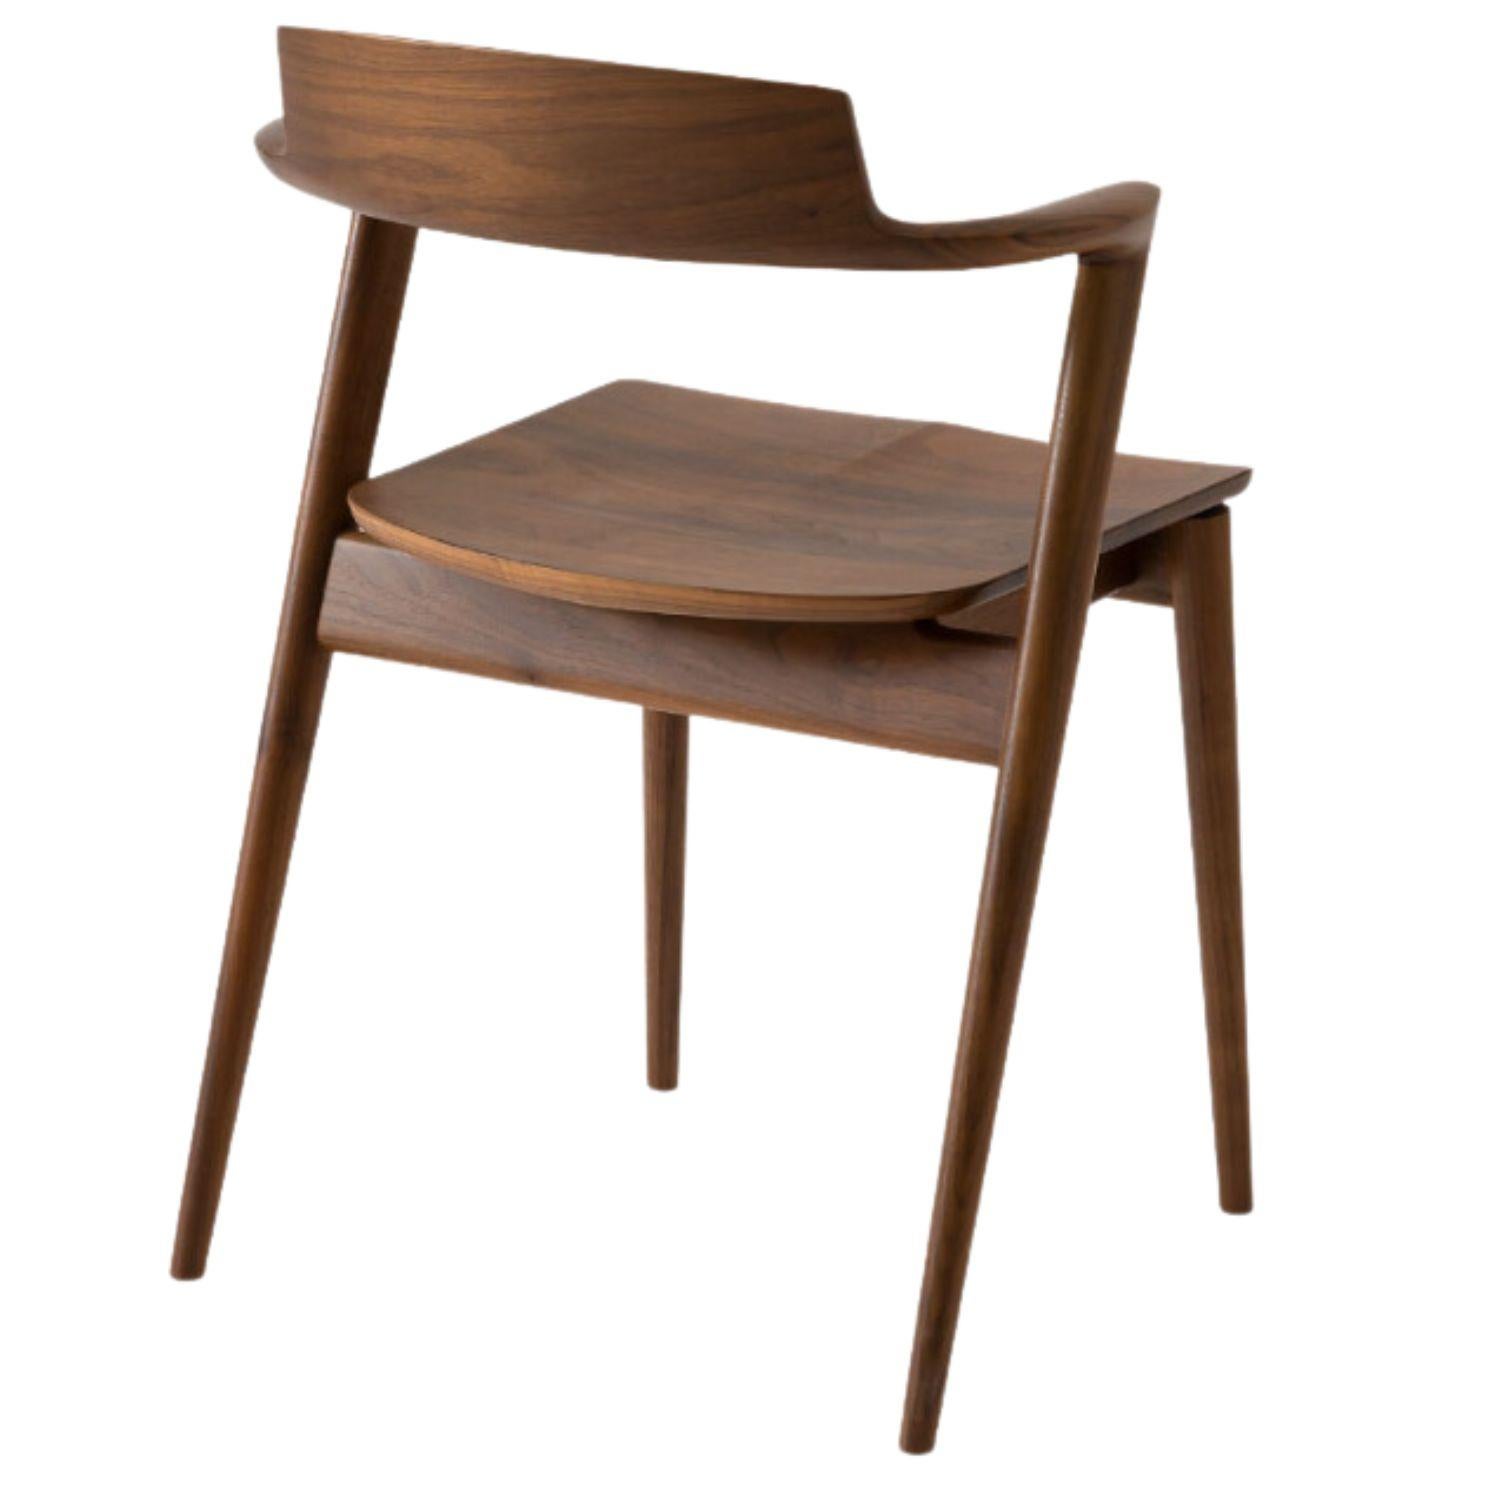 Motomi Kawakami 'Seoto KD21' semi-arm dining chair in walnut for Hida.

For centuries, famed Hida artisans in Gifu prefecture have played a role in Japan's woodworking culture, crafting iconic bentwood furniture from sustainable local forests.